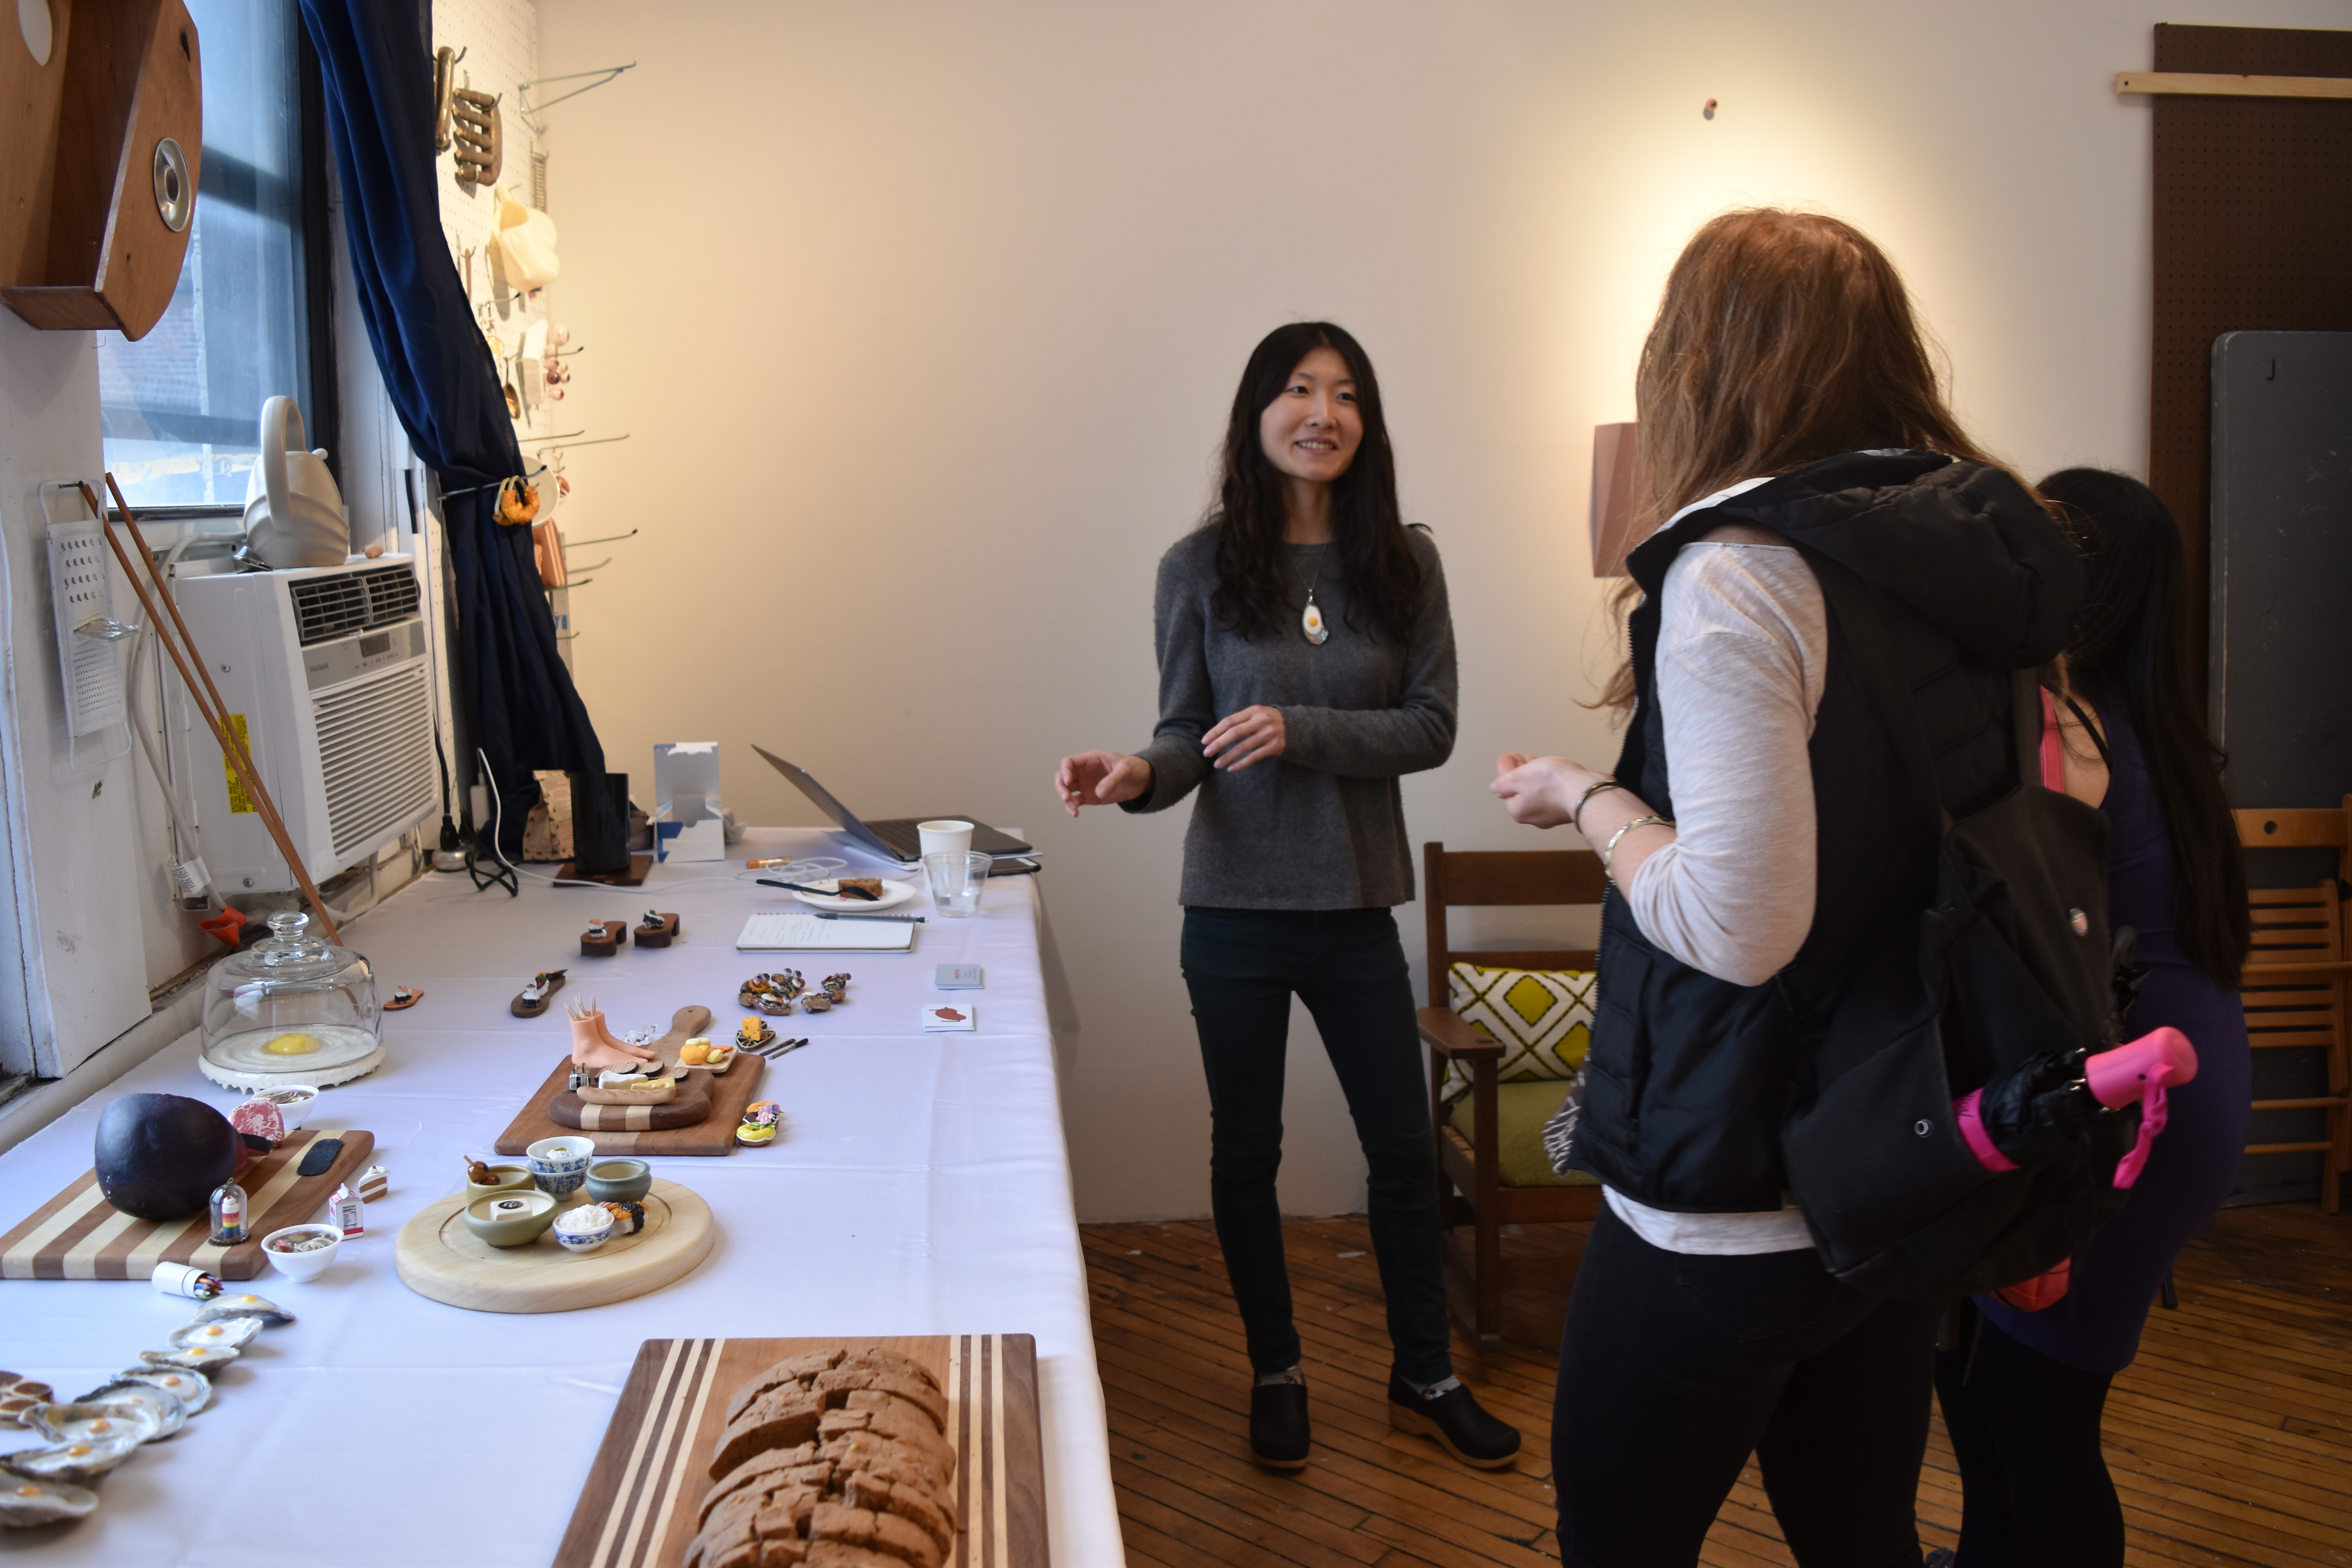 Introducing to visitors at Open Studio